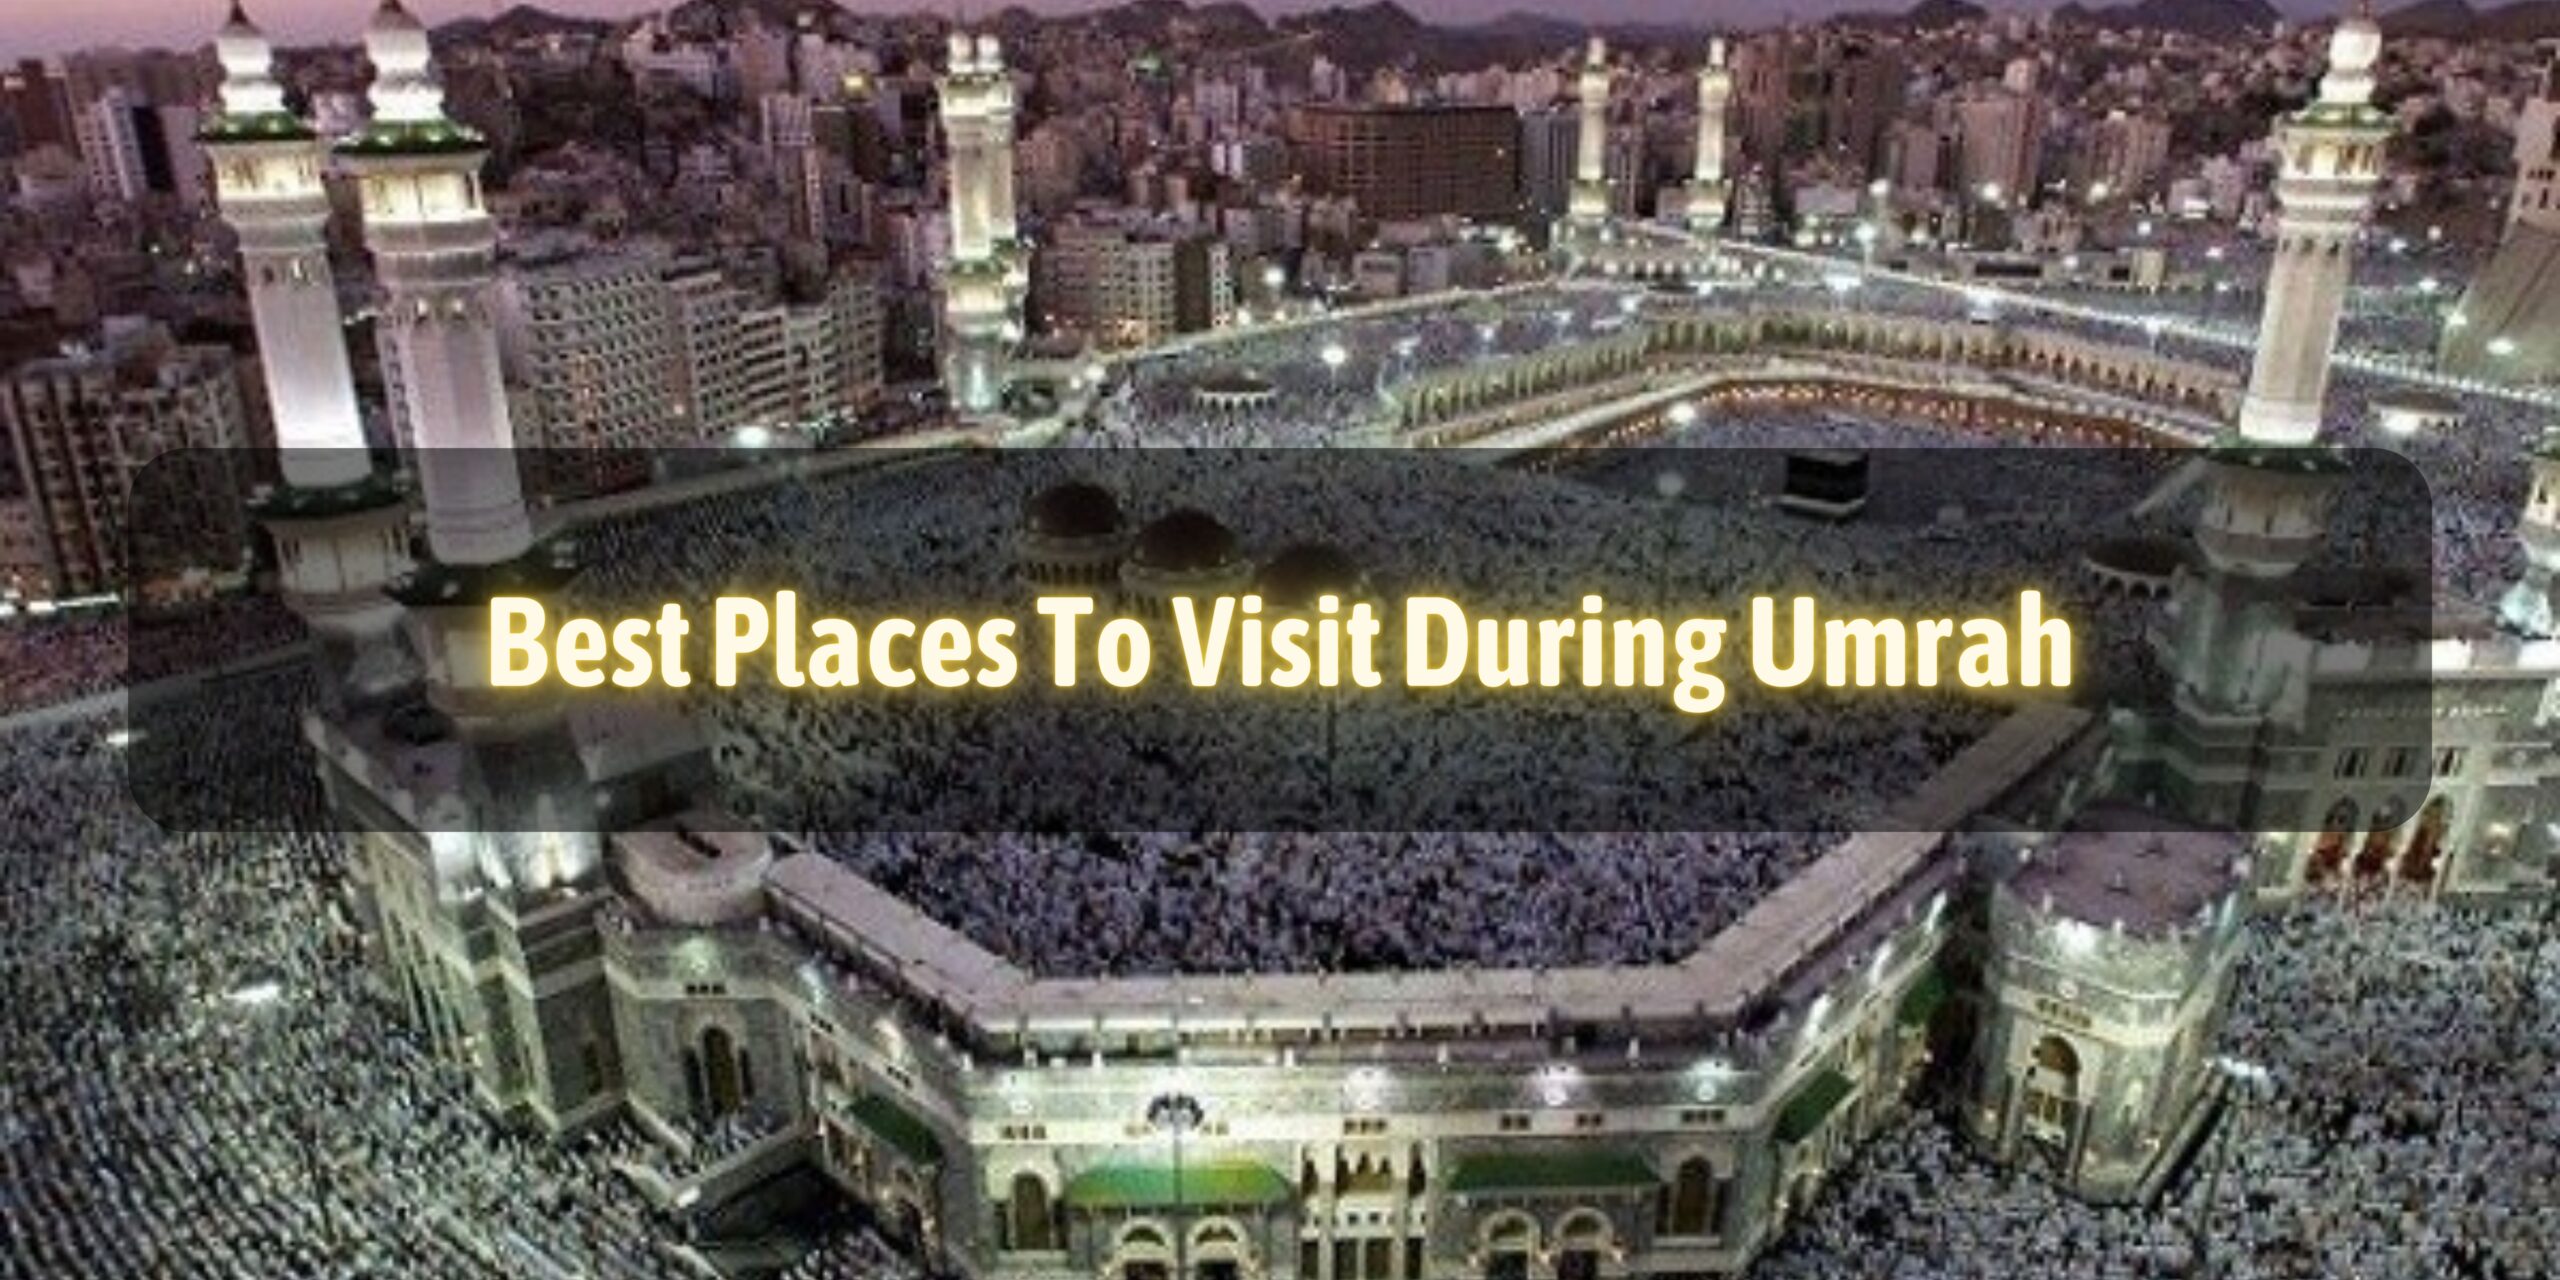 Best Places To Visit During Umrah